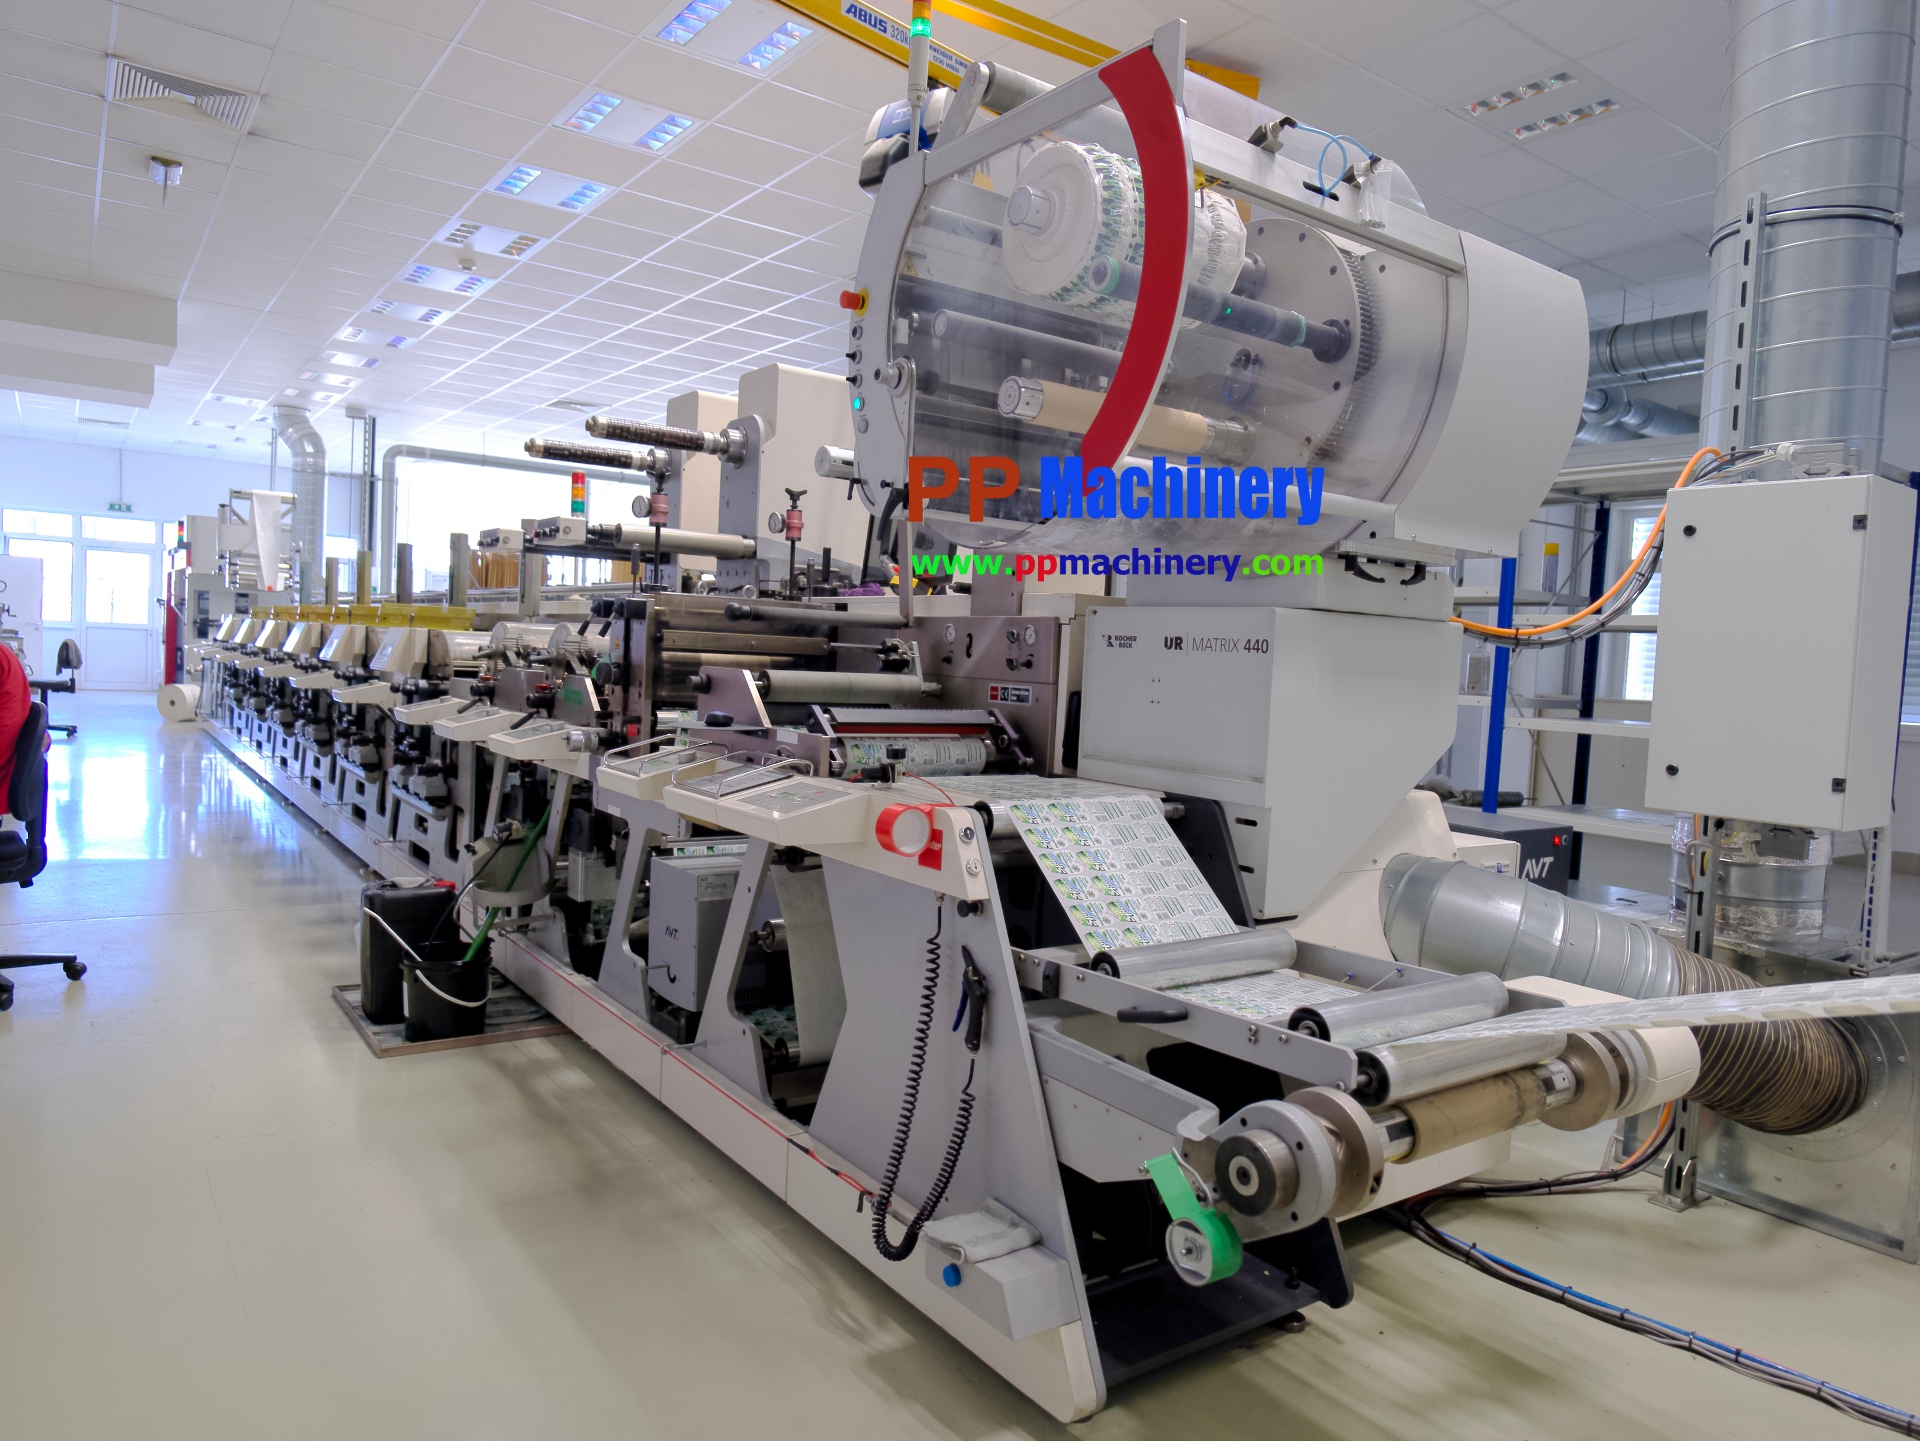 Nilpeter MO 4 6 colours offset label press + 4 flexo units from 2014 in mint condition